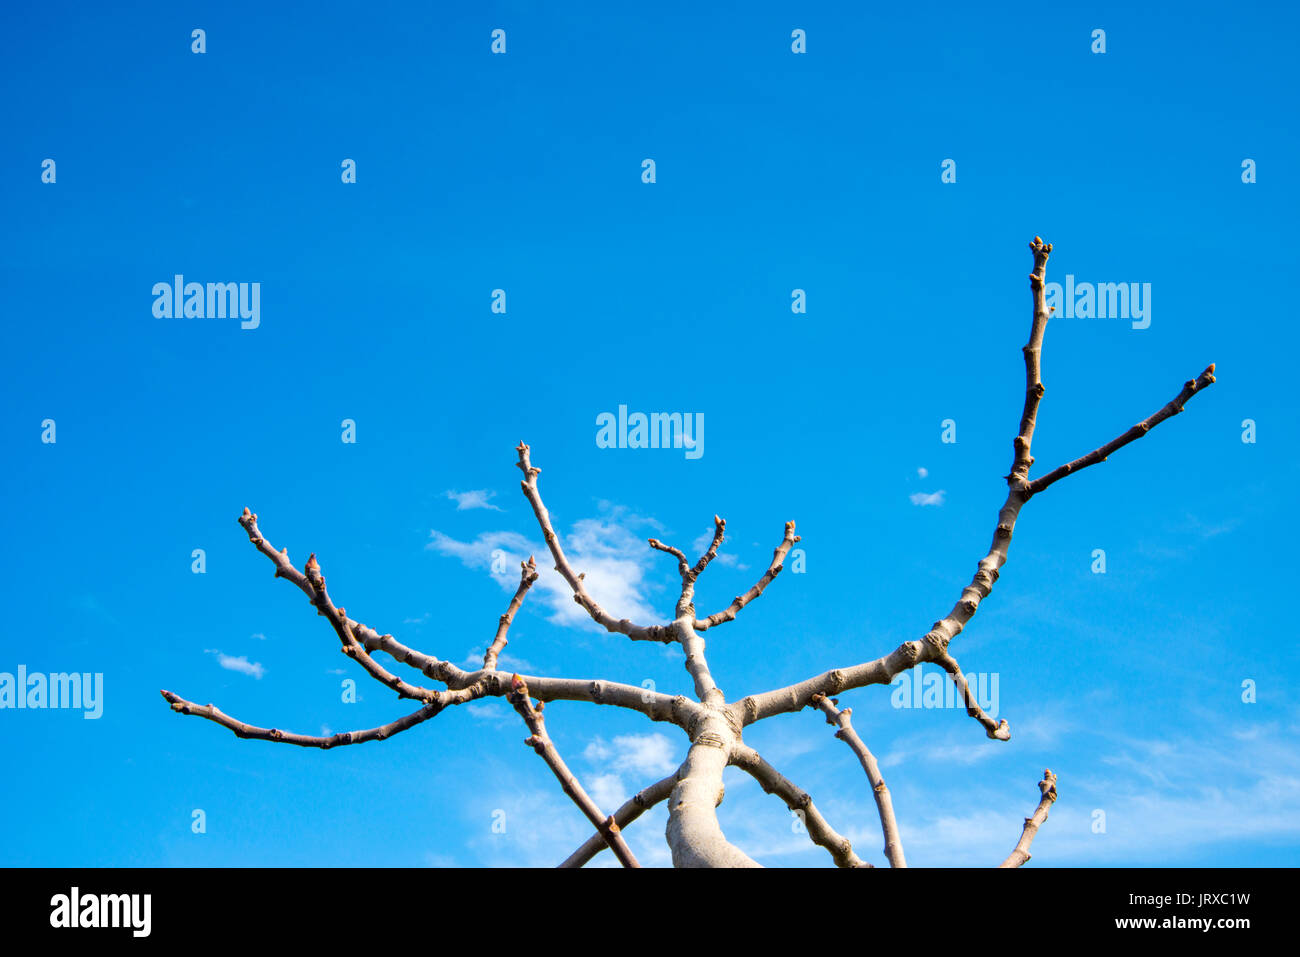 Branches against blue sky. Stock Photo